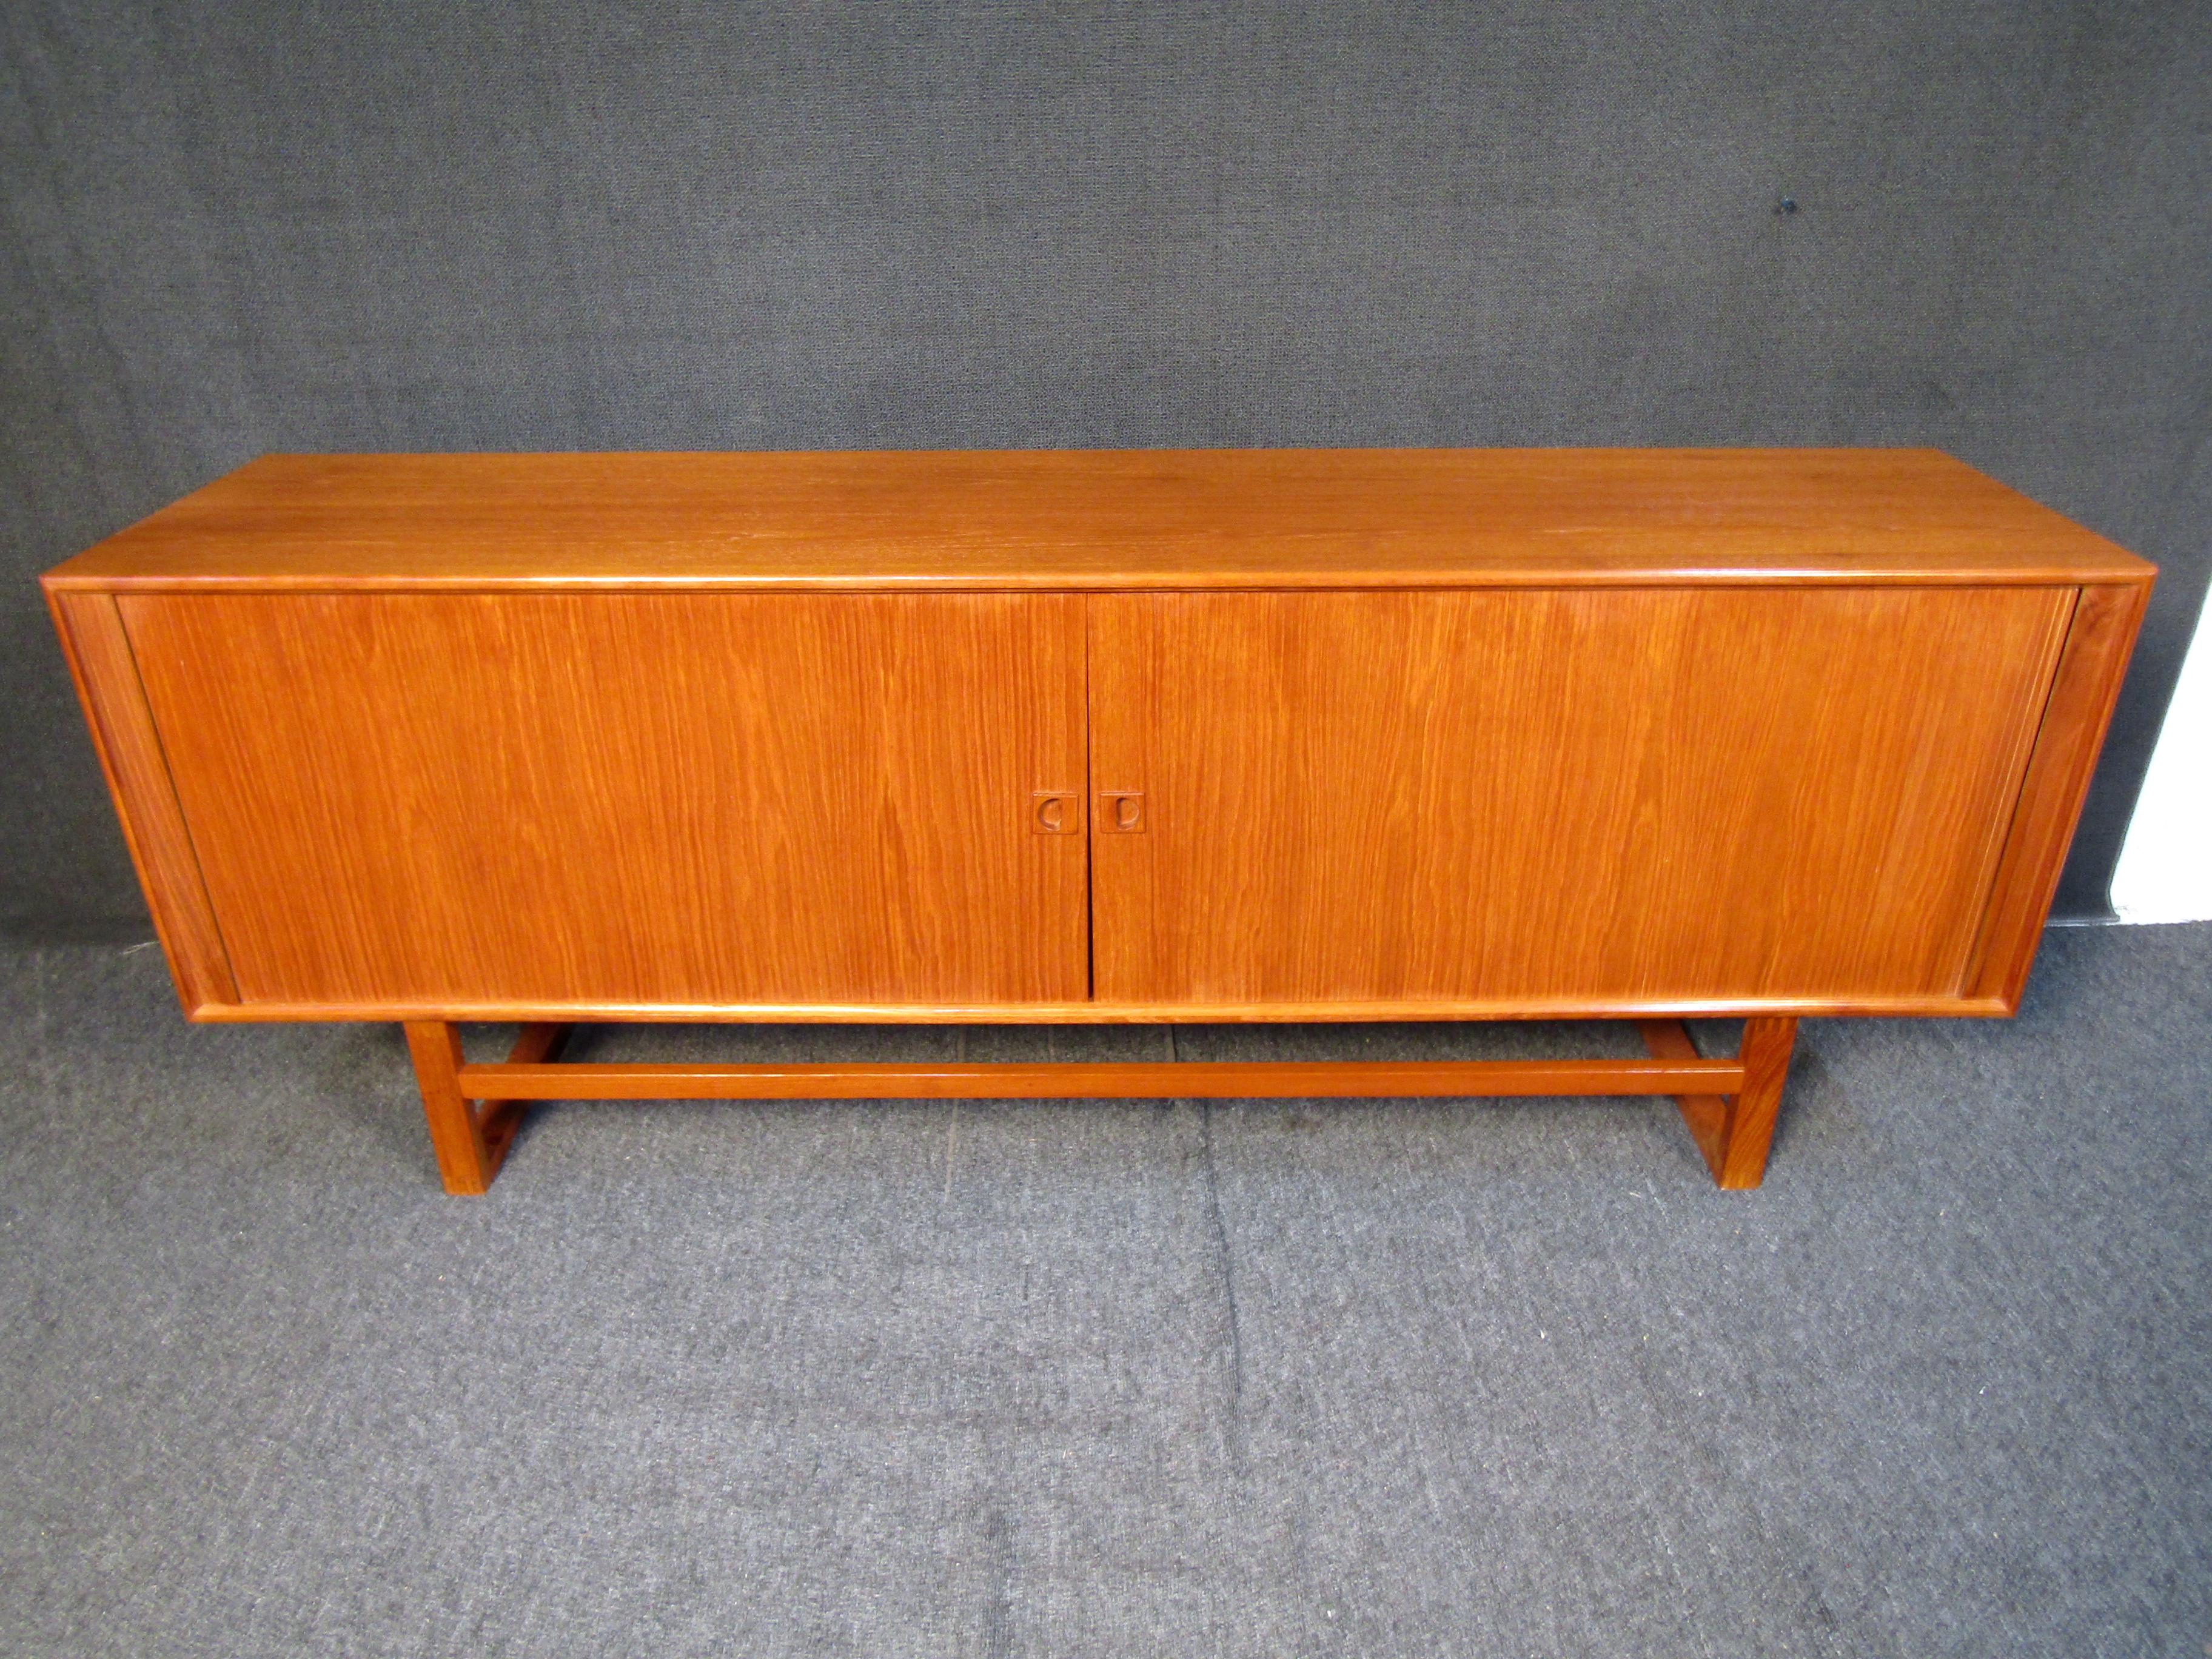 This stunning Danish Modern tambour sideboard features a beautiful teak finish, and spacious interior cabinet space. Multiple shelves and a lined center drawer that makes this a versatile storage piece for any Mid-Century setting. Made in Denmark,